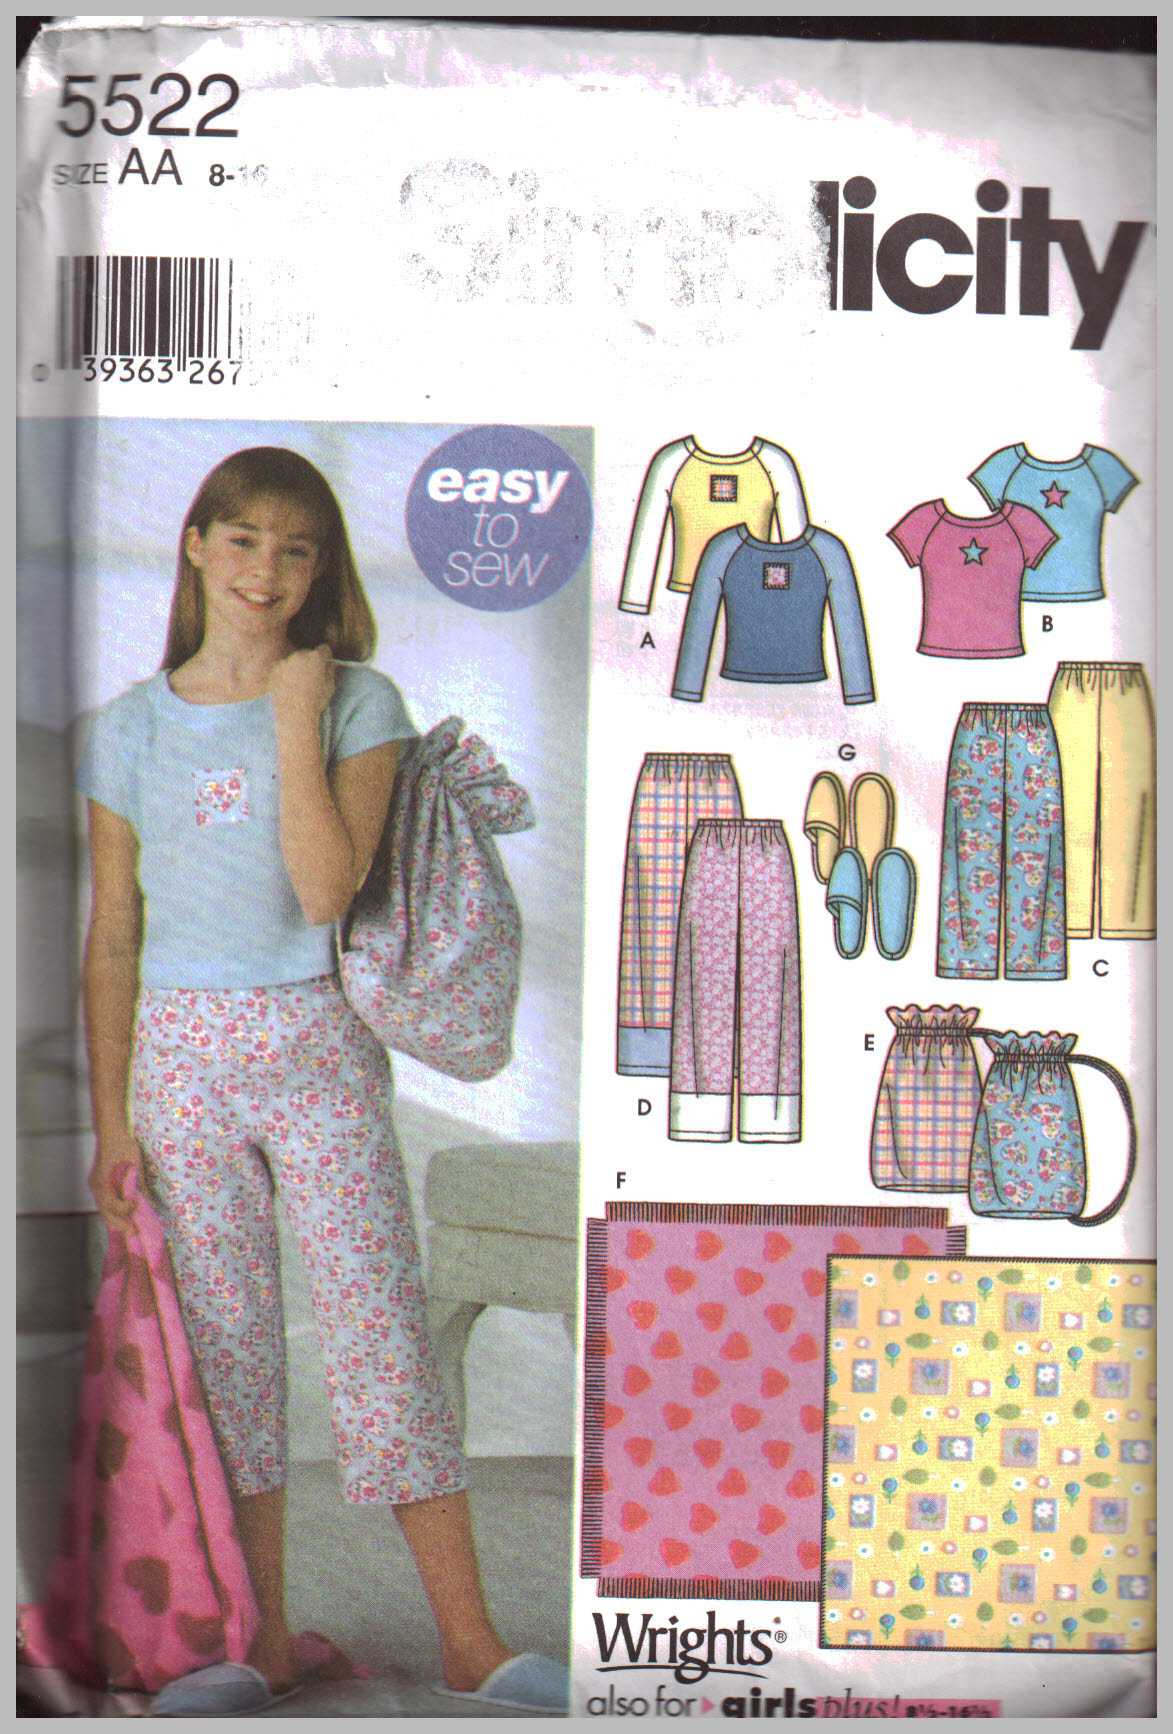 Simplicity Pattern S8519 Boys' and Men's Slim Fit Lounge Pants